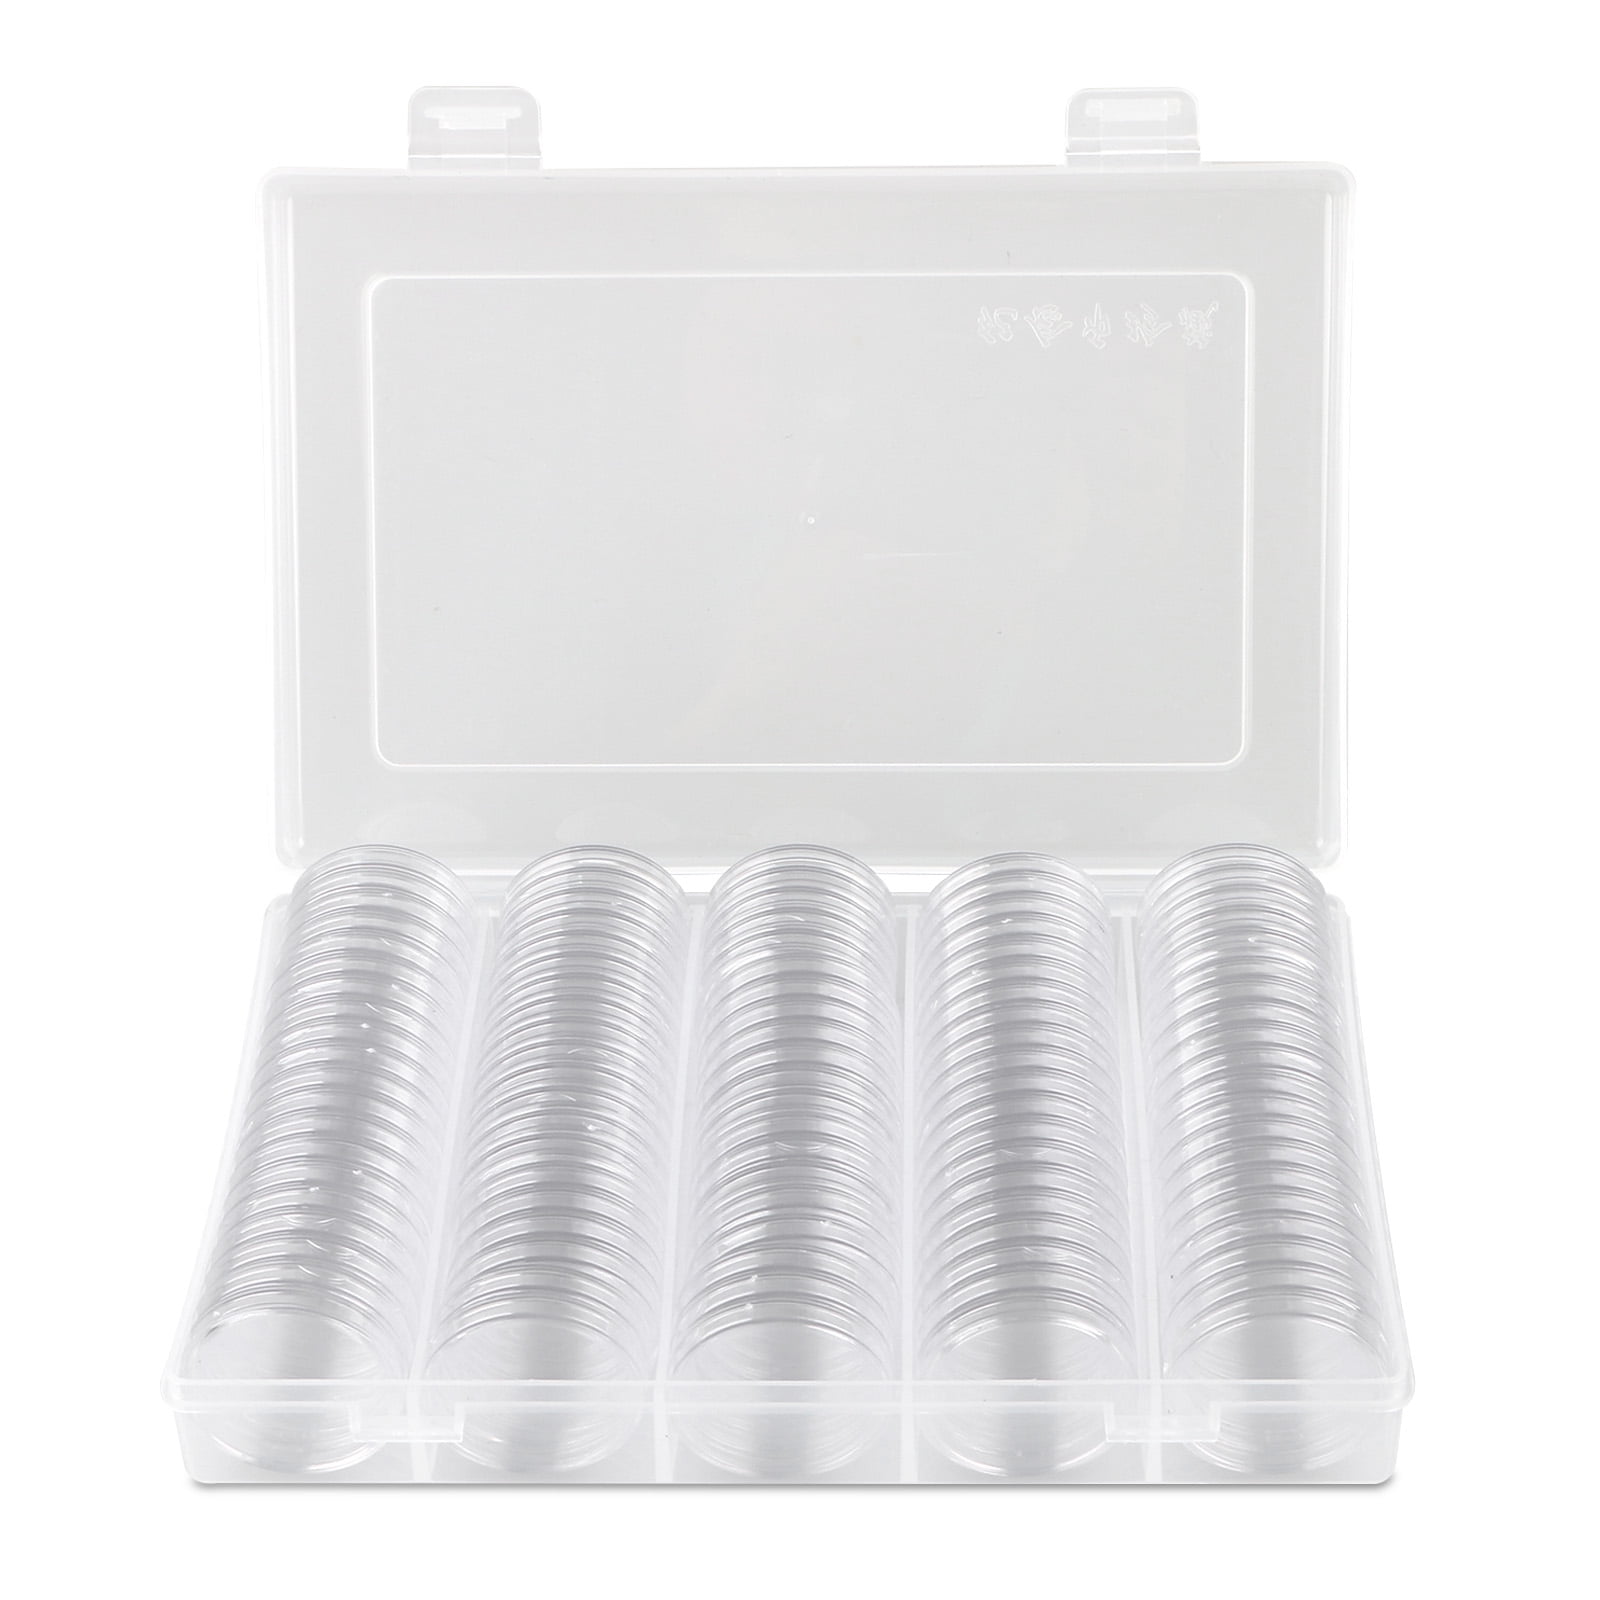 FOR COLLECTORS capacity for 30 coins per 1 case Details about   COIN PLASTIC CASE SIZE A4 